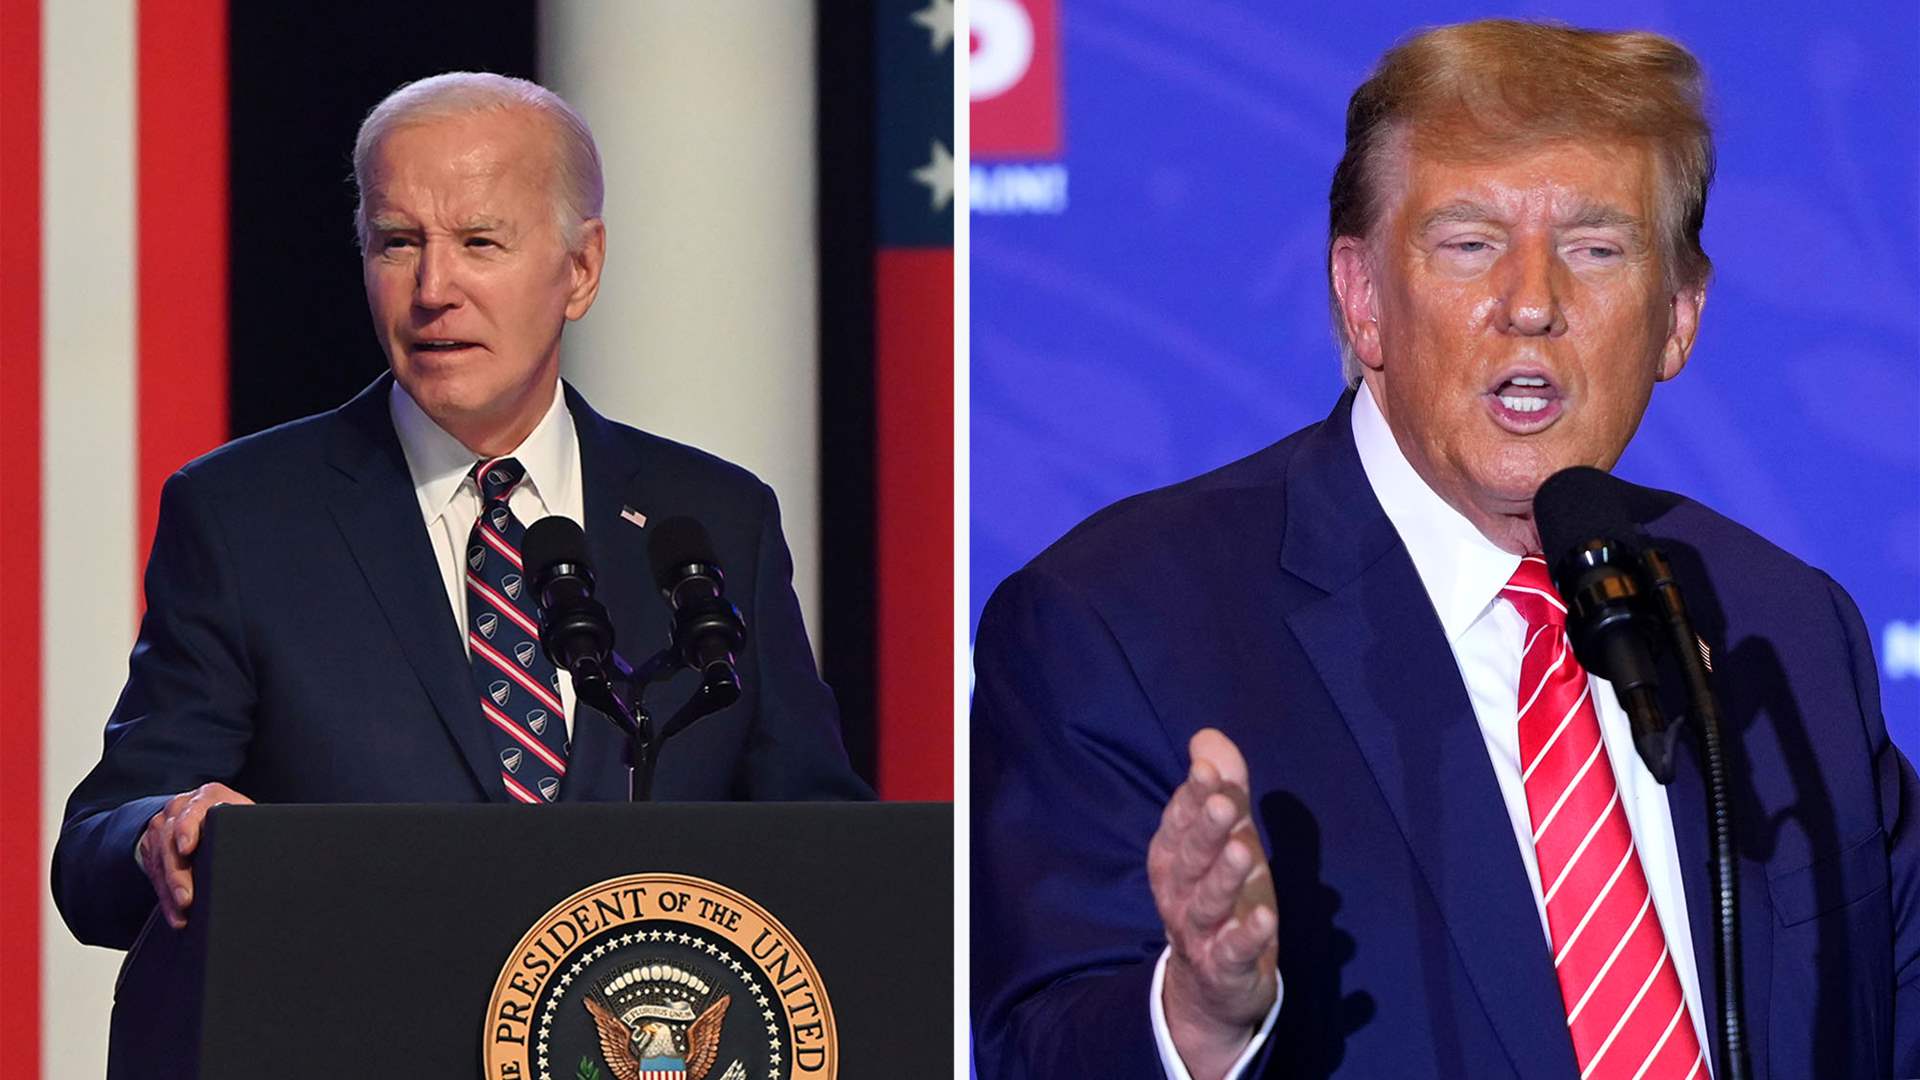 Pressure Mounts on Biden as Decision Time for 2024 Election Looms